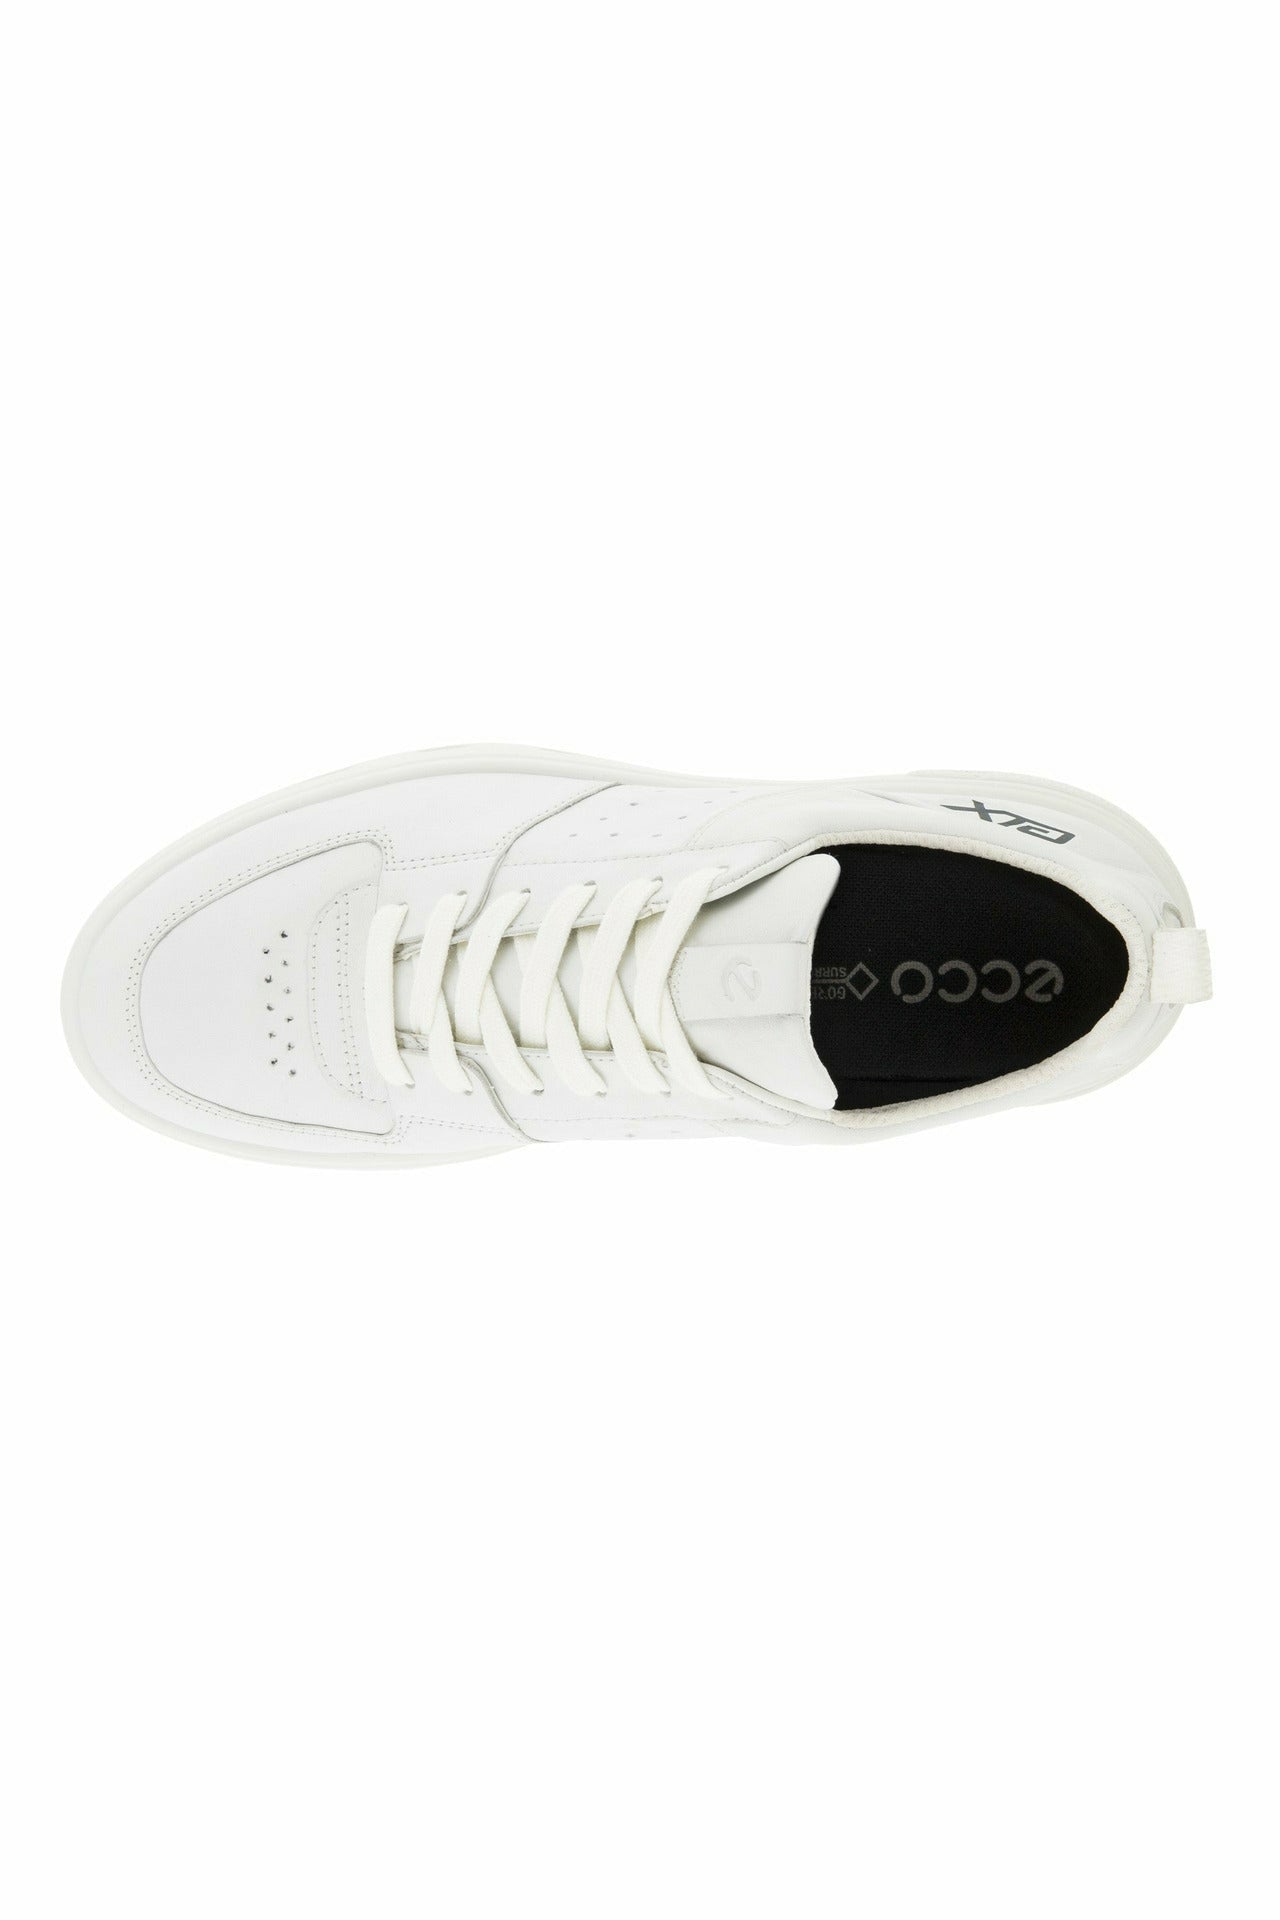 ECCO 520814-01007 Mens shoes in White